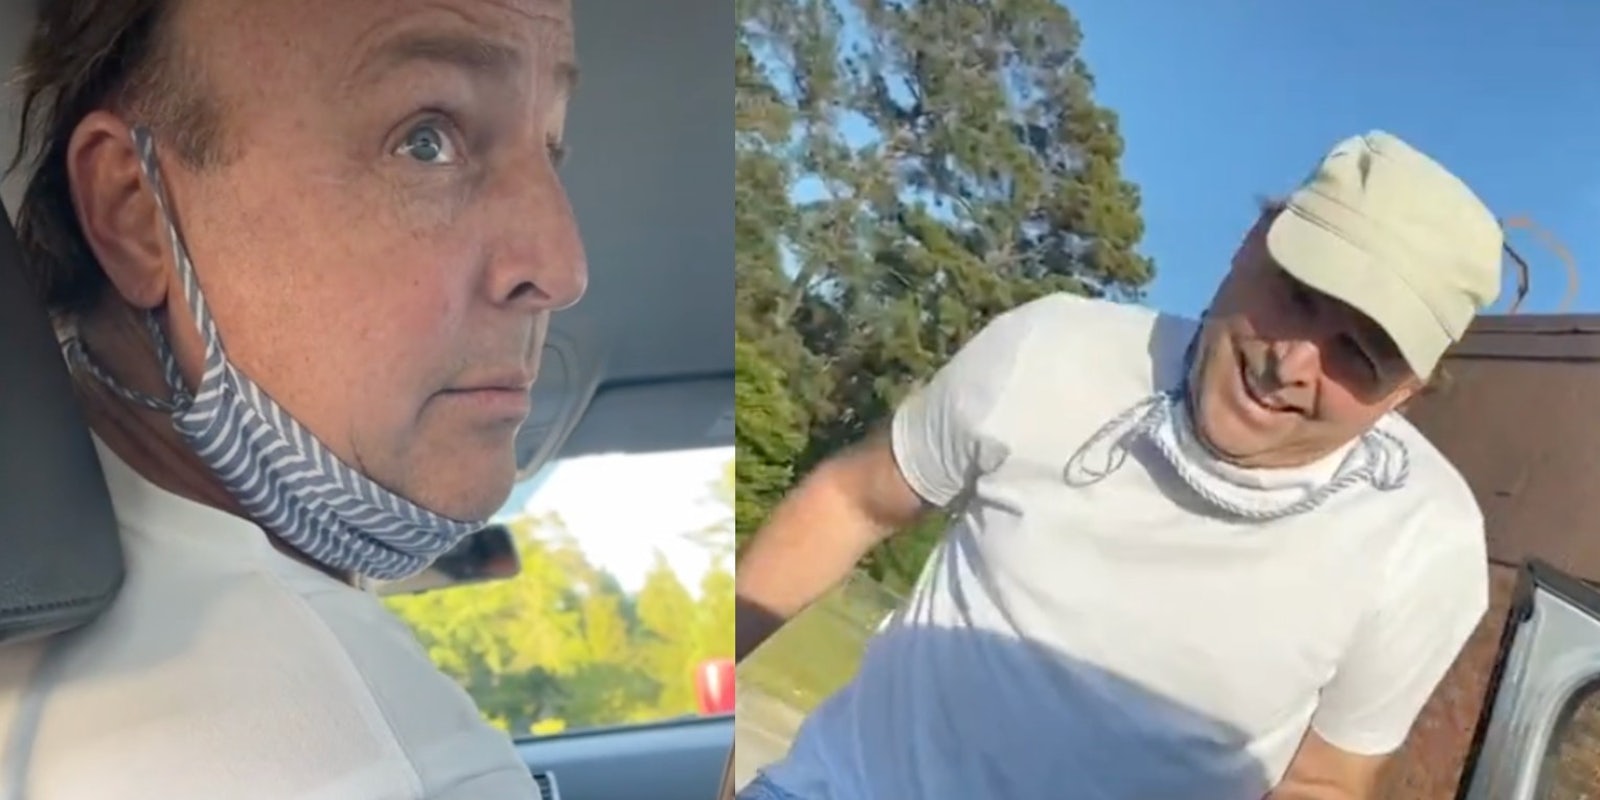 Uber driver in South Carolina hurled racist comments at Black passengers